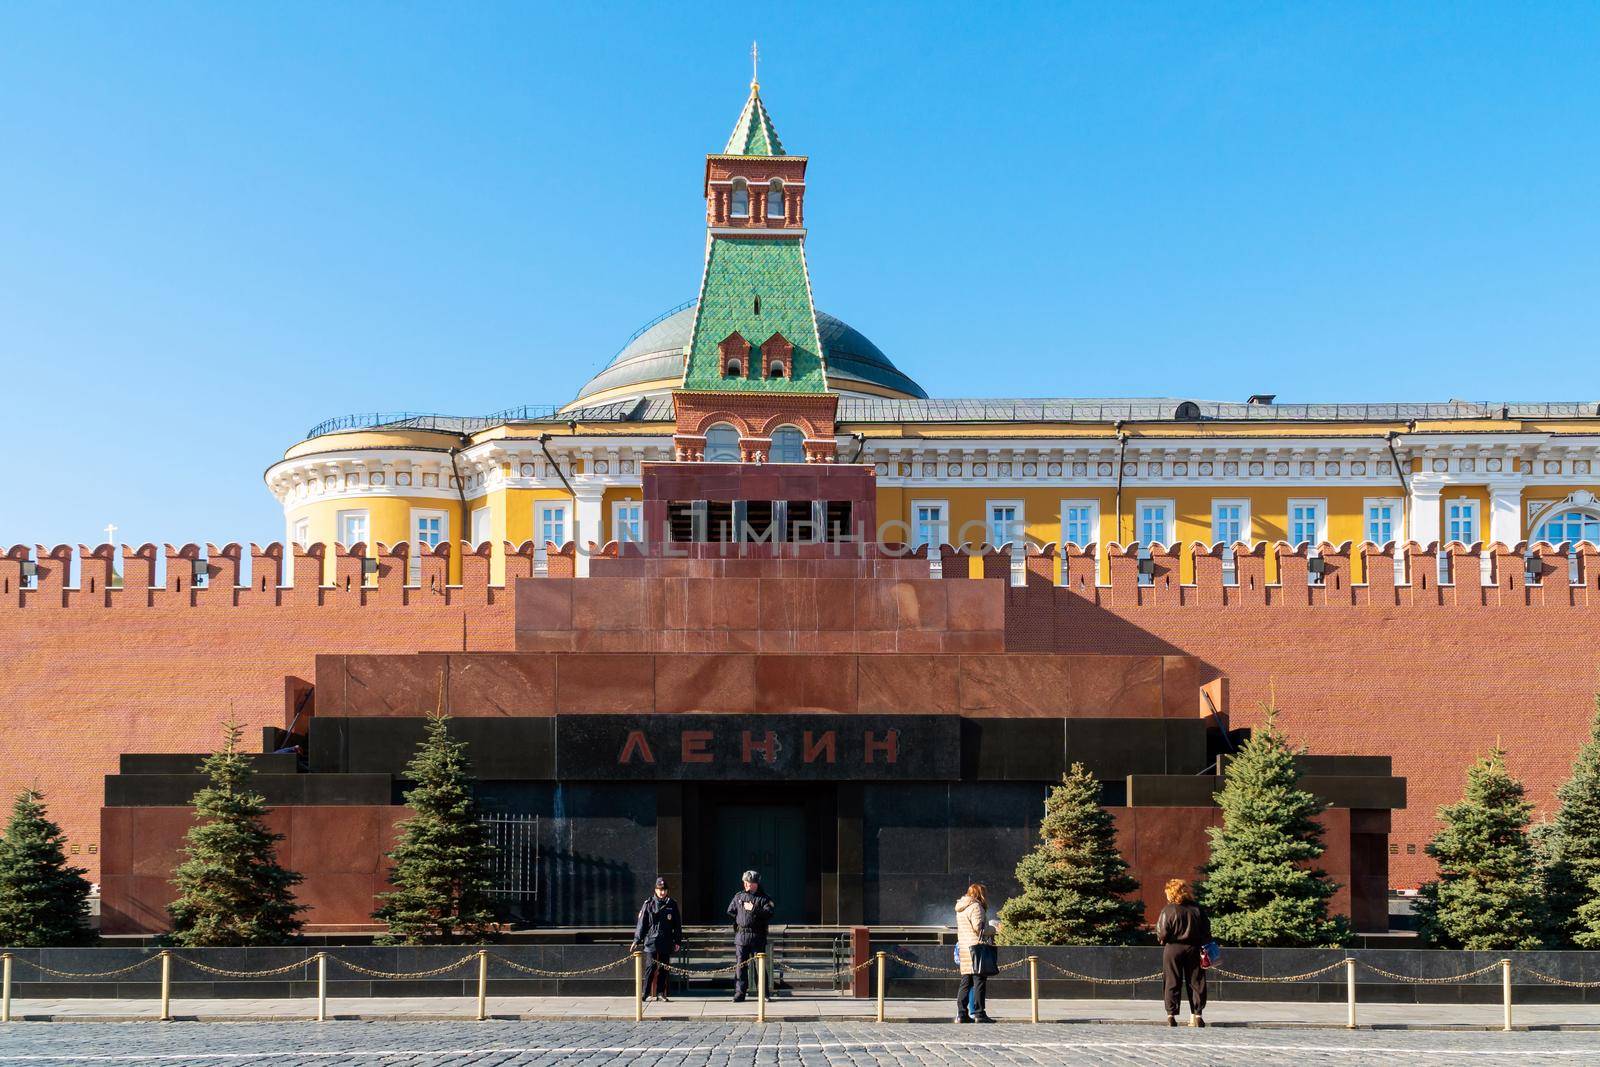 The Mausoleum of Lenin and Kremlin wall also known as Lenin Tomb on Red Square in Moscow at Russia by Nuamfolio